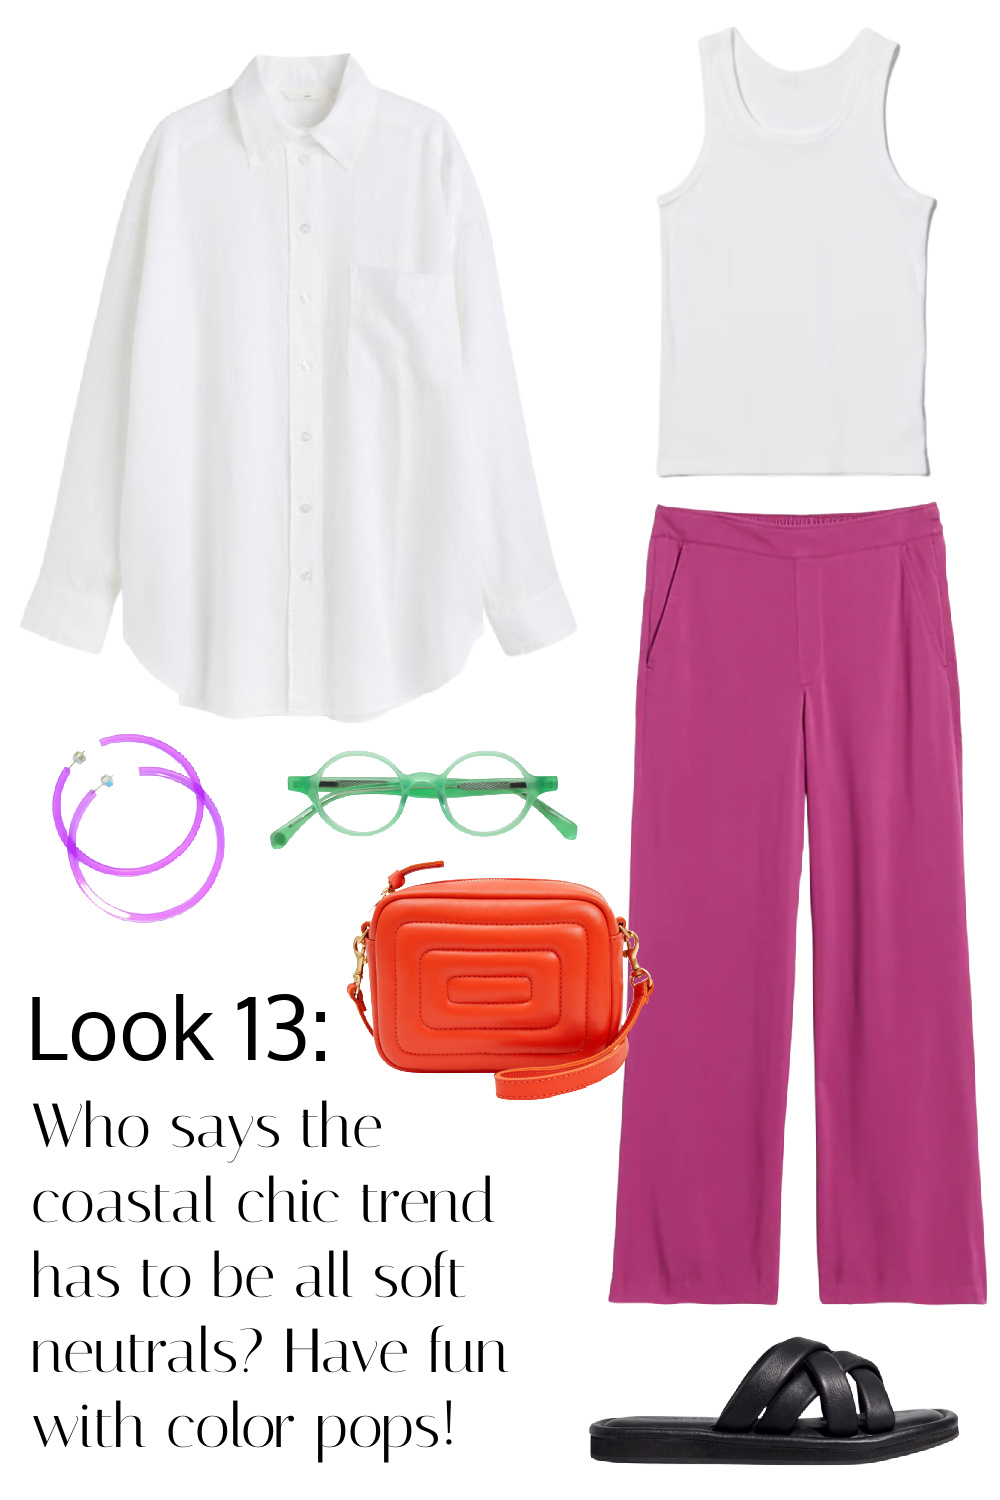 Same white linen shirt over the white tank, but this time styled with the magenta soft wide leg pants. Who says the coastal chic trend has to be all soft neutrals? Have fun with color pops!